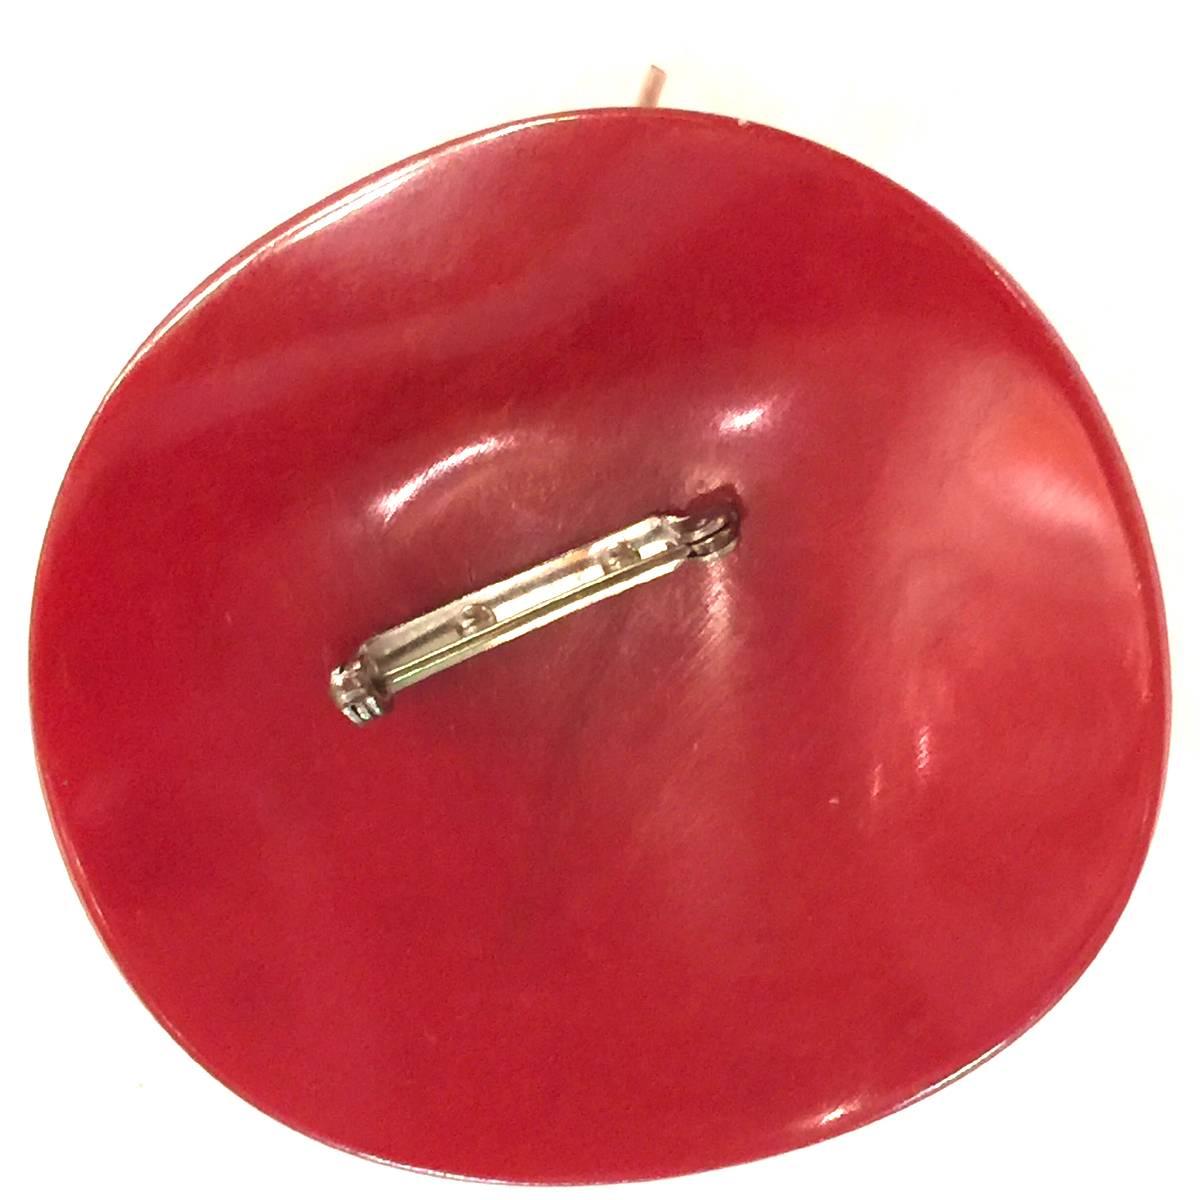 Another variant on the figural bakelite hat pin/brooch is the polka dotted version with gimp accent around the crown. The polka dots are painted on in an overall pattern, and show appropriate very minor wear as an original piece almost 90 years old.